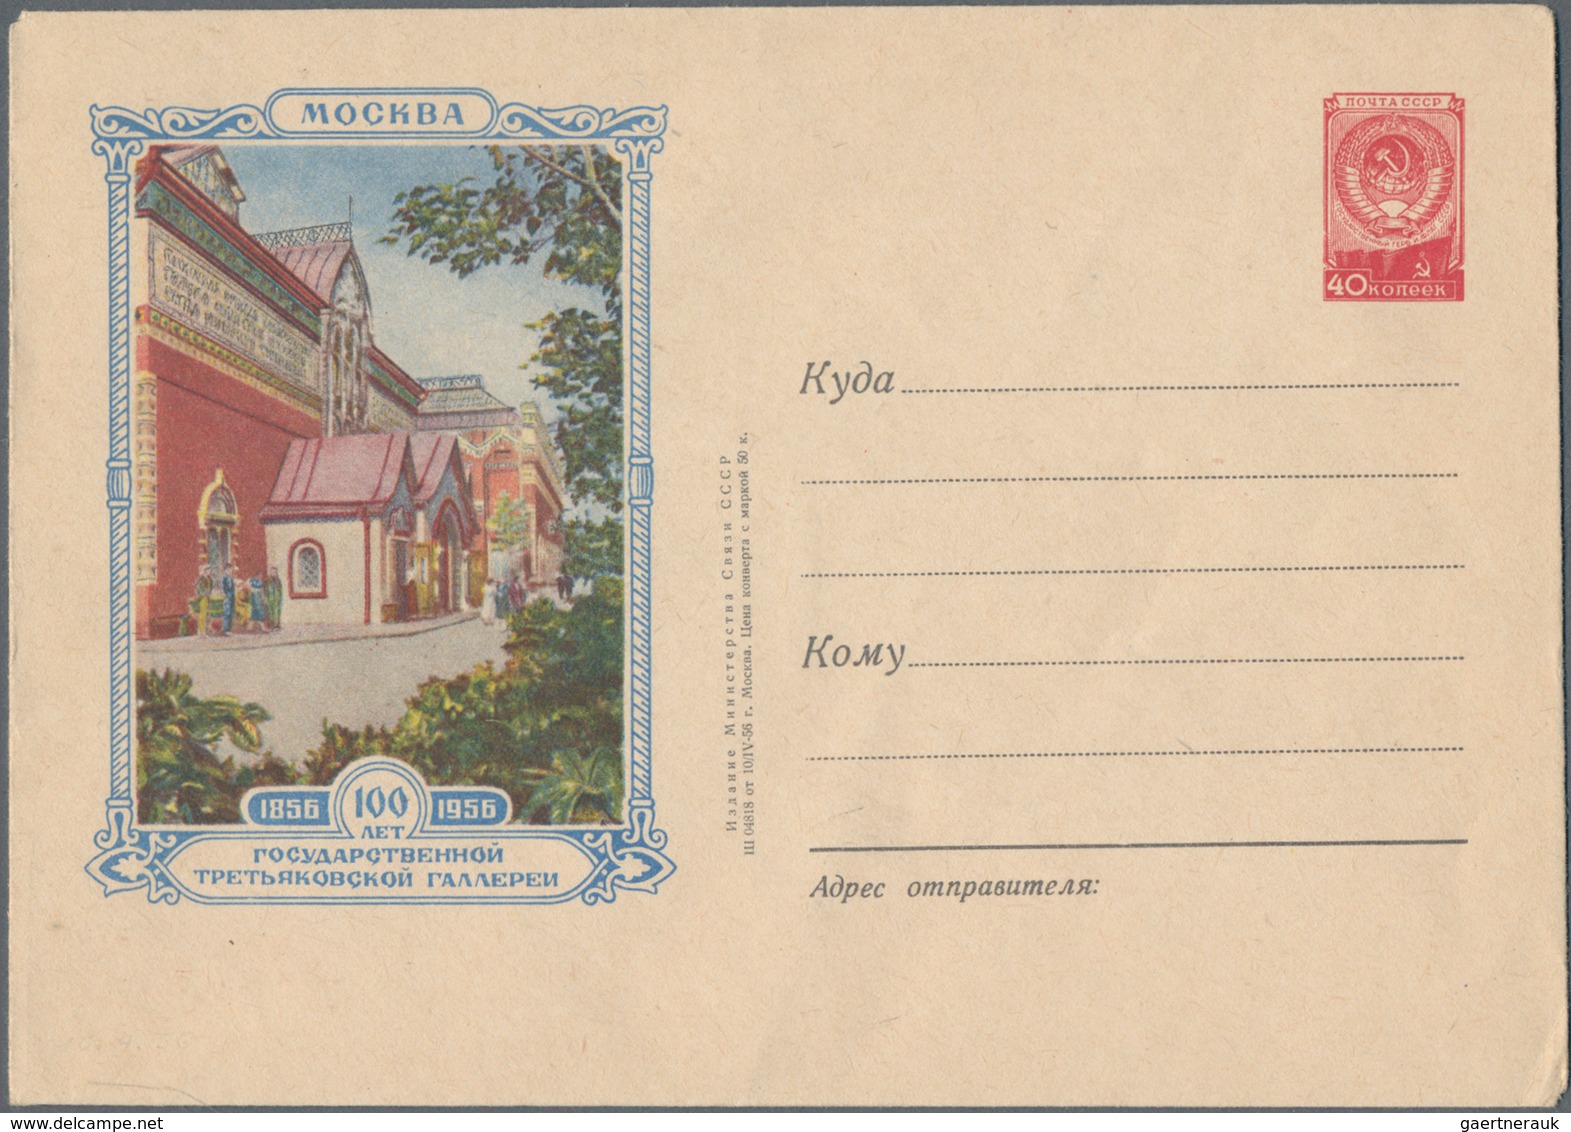 Sowjetunion - Ganzsachen: 1937/60 fantastic collection of about 660 almost exclusively unused pictur